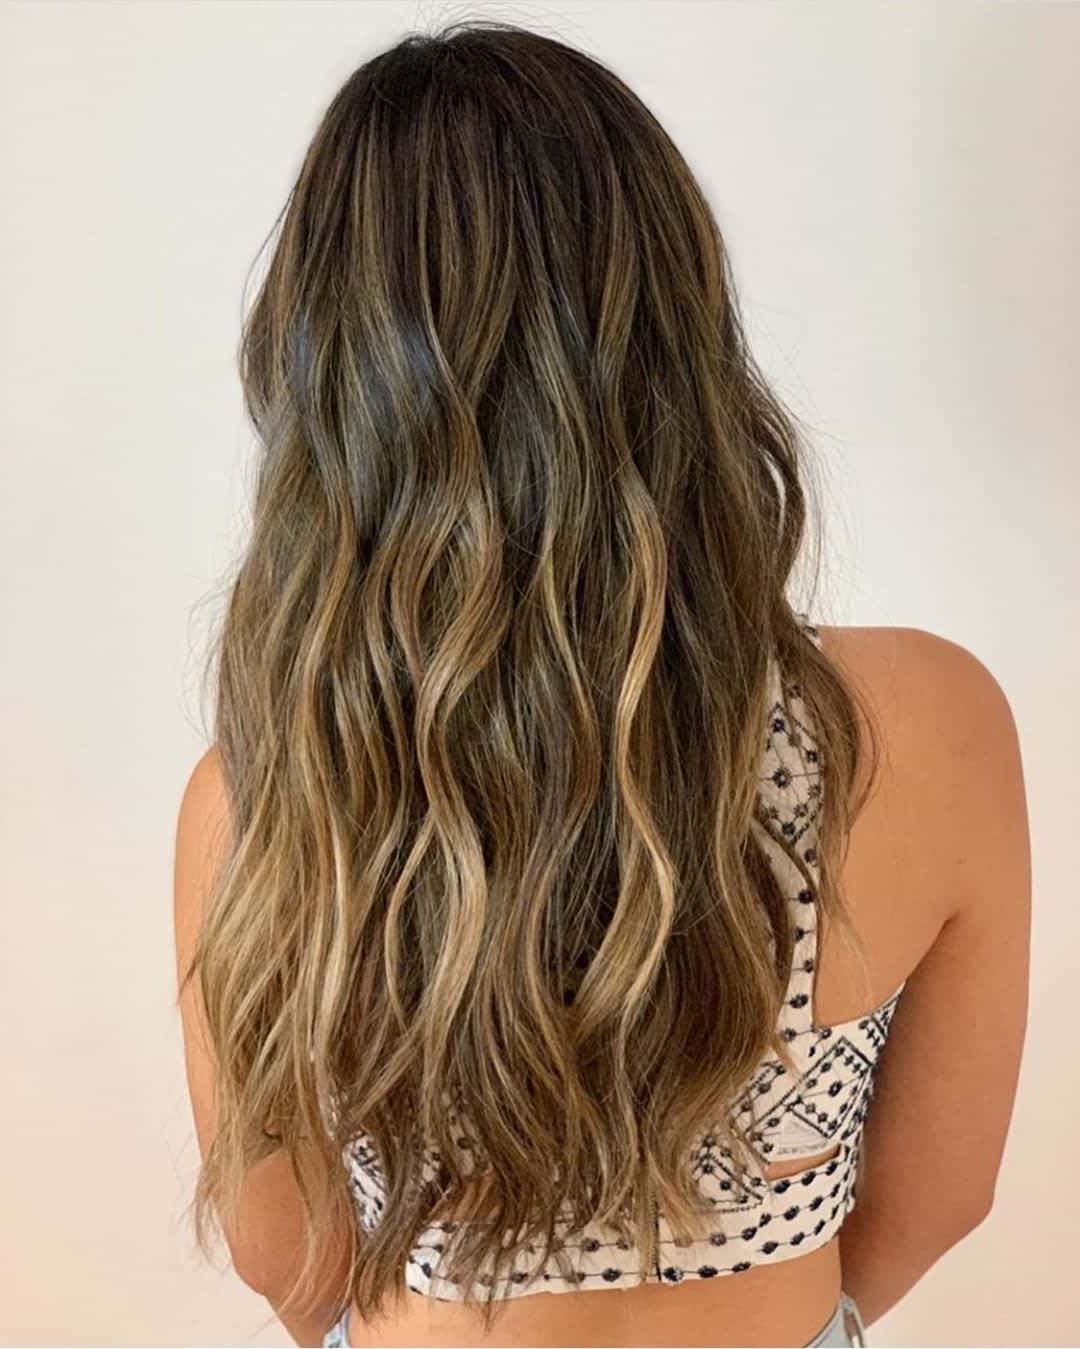 10 Best Beach Wave Hair And Balayage Ideas With Icy Charm! – Hairstyles  Weekly For Famous Beachy Waves With Ombre (View 7 of 18)